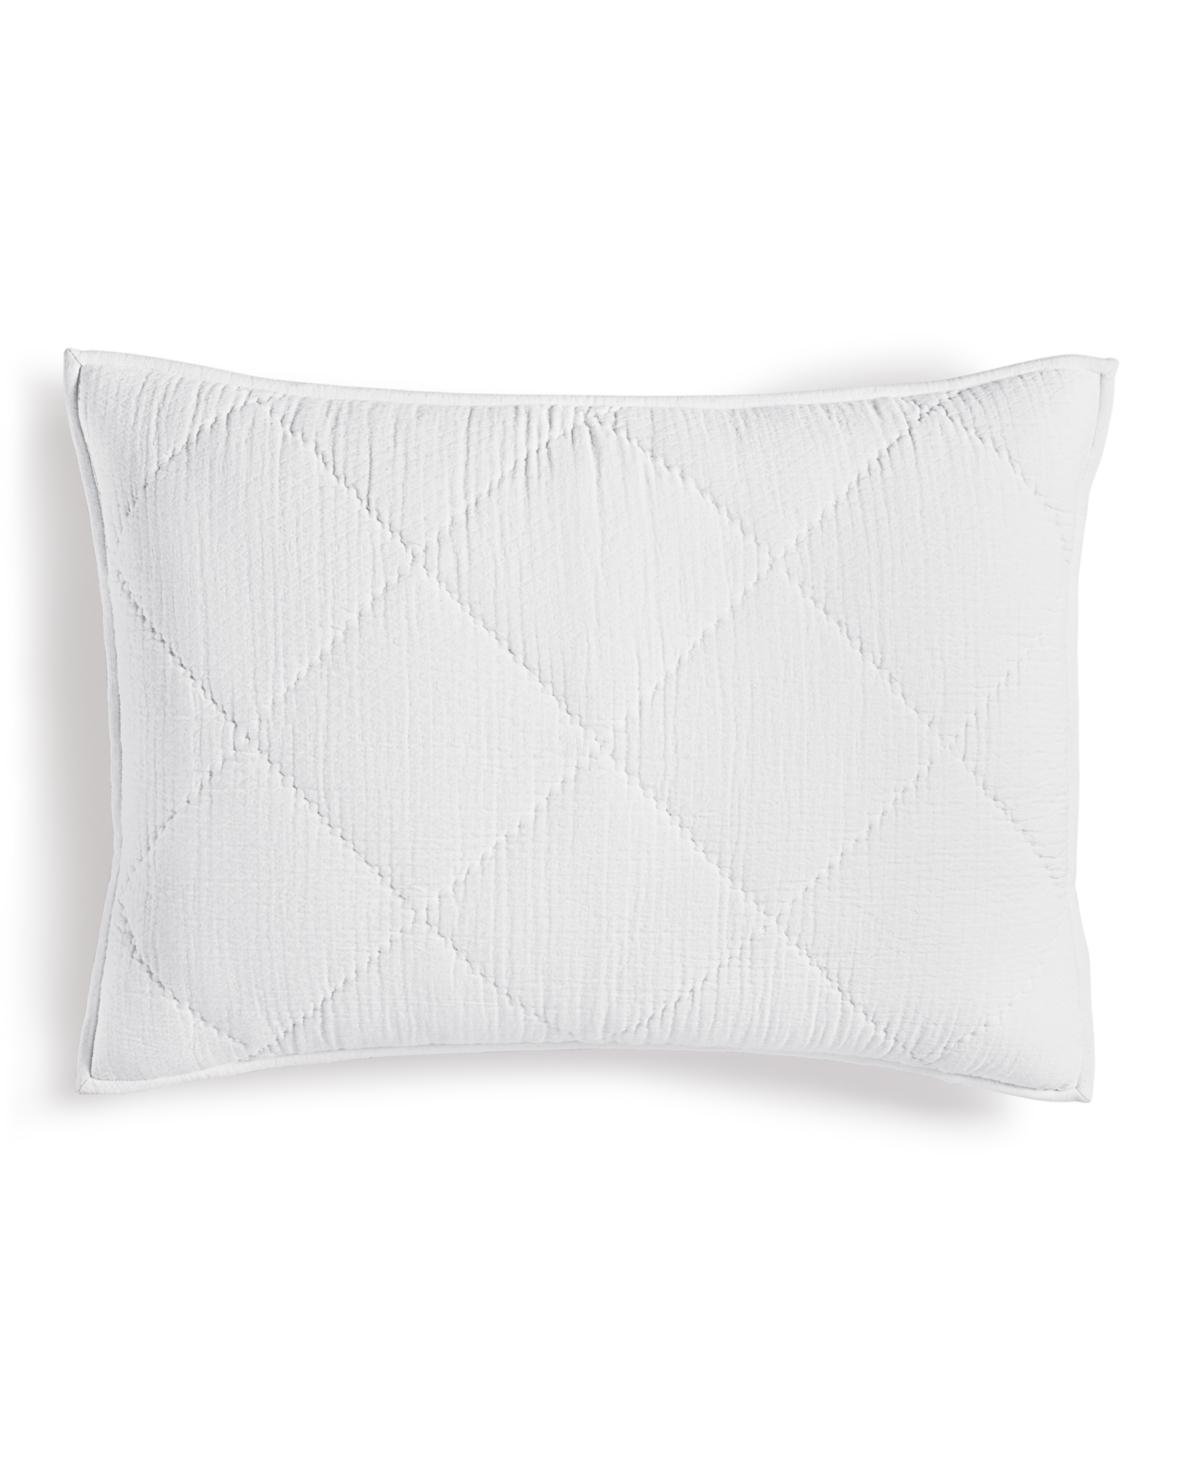 Closeout! Hotel Collection Dobby Diamond Quilted Sham, Standard, Created for Macy's - Natural